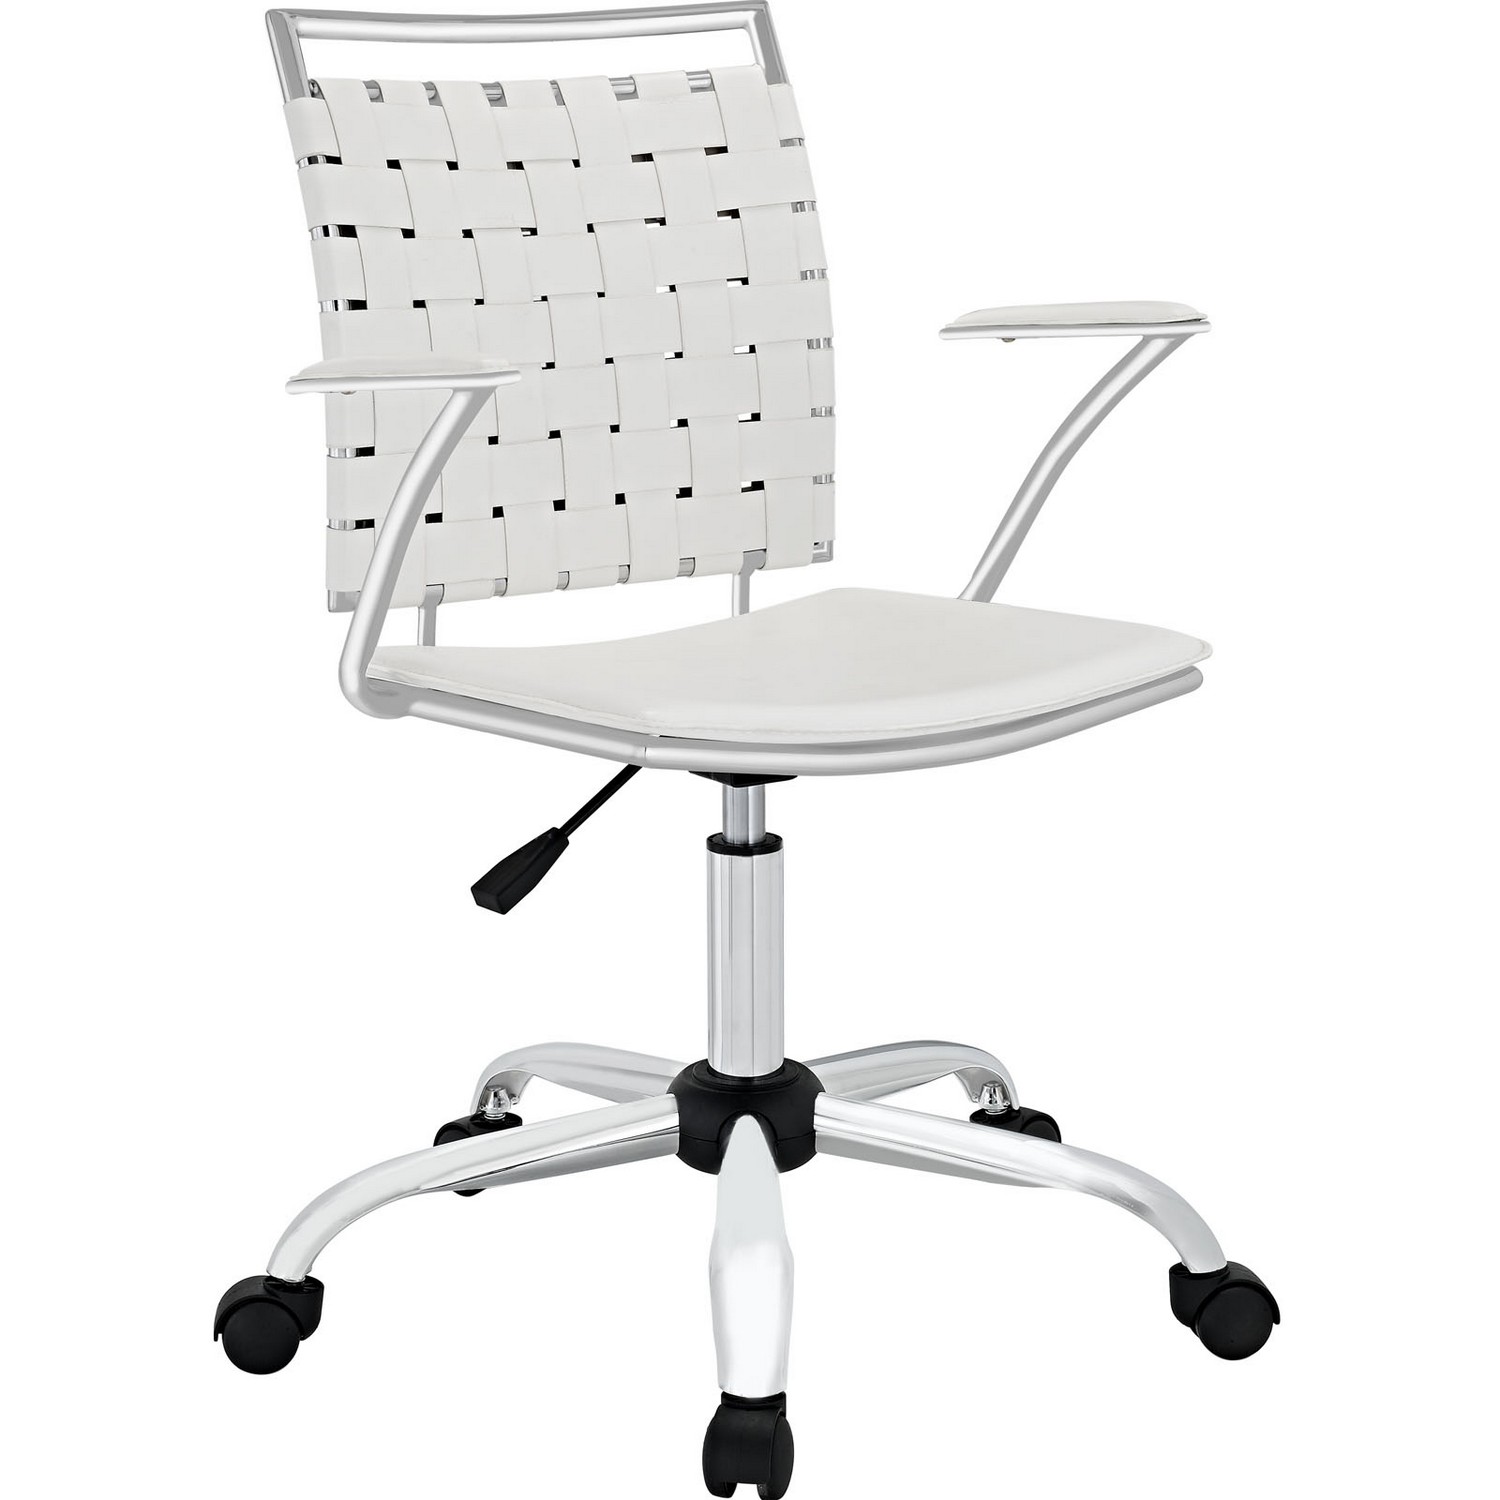 Modway Fuse Office Chair - White